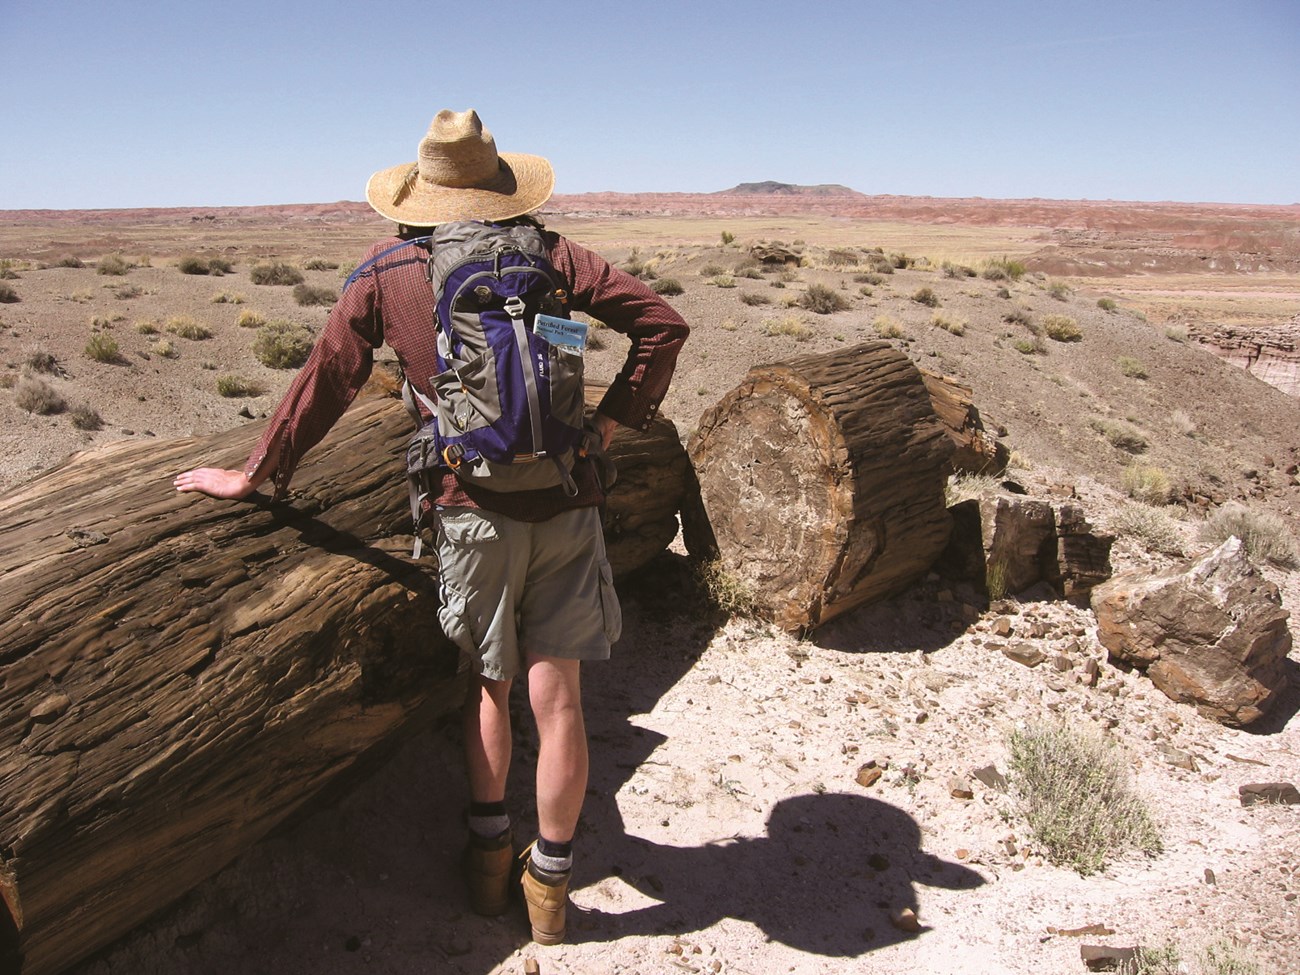 Man with backpack leans on a petrified log looking away to grassland under a blue sky.